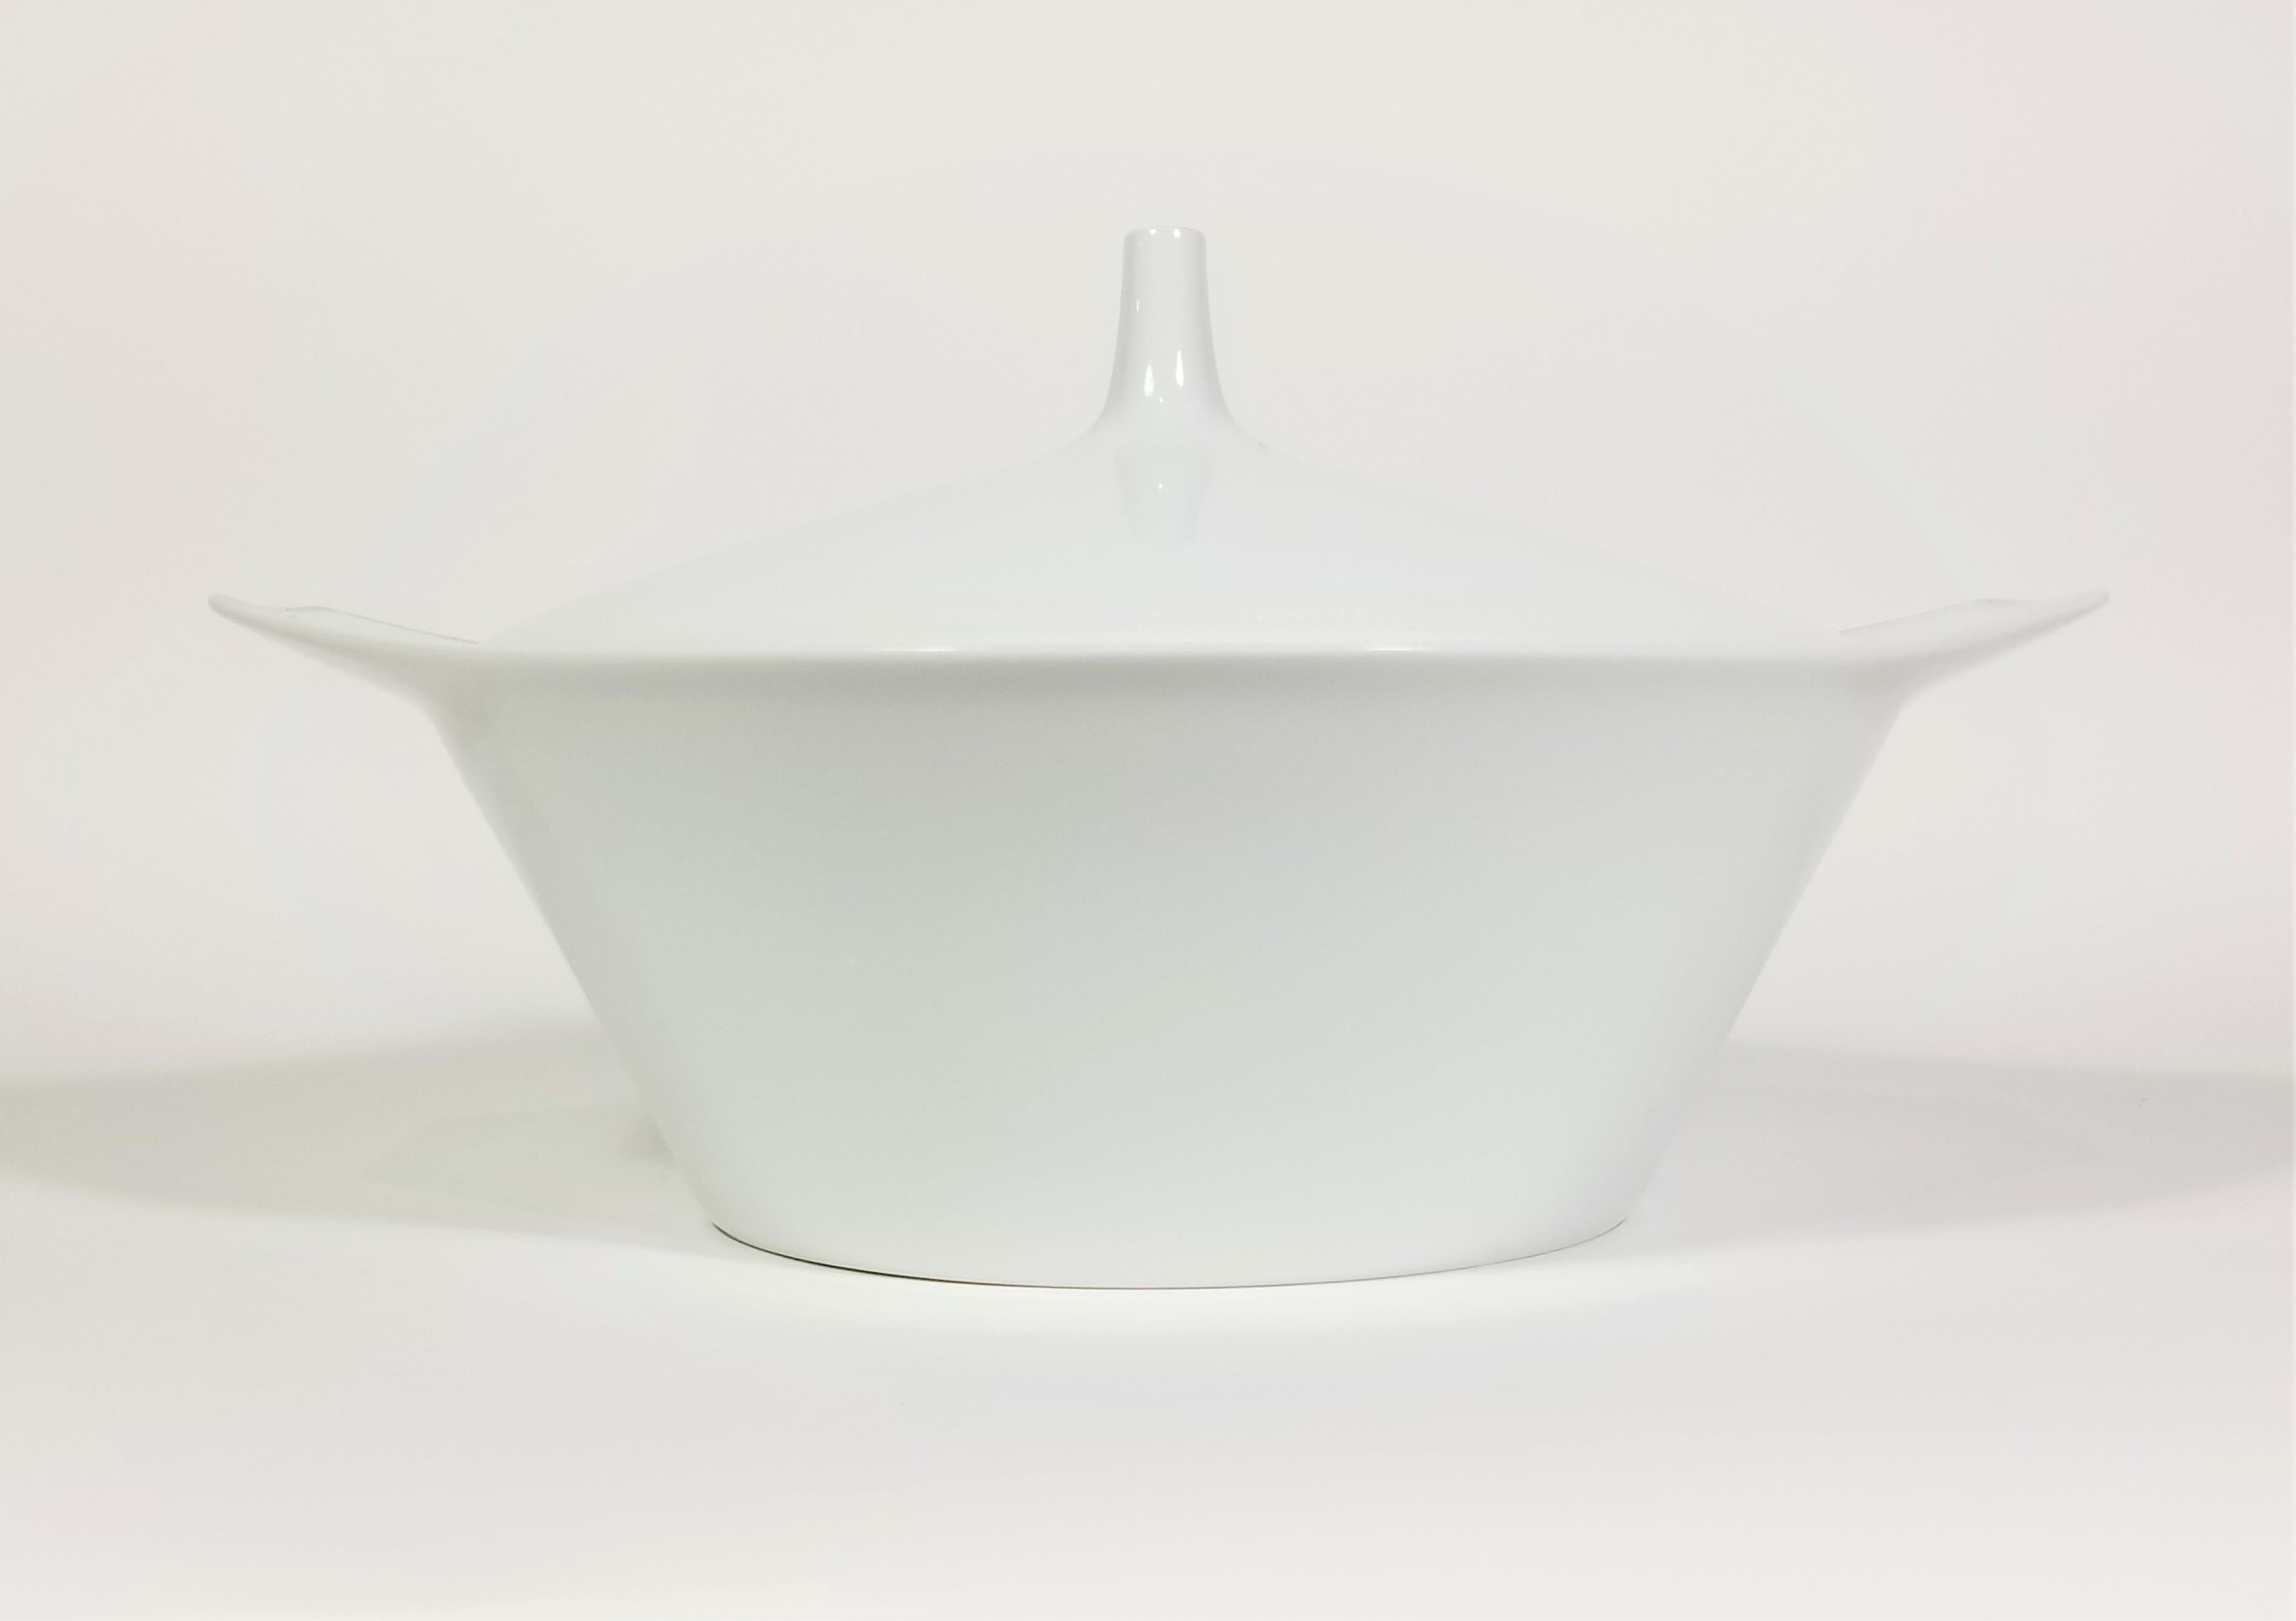 Mid-century 1960s Rosenthal lidded serving dish or bowl. White porcelain with silver trim. 1960s Design.